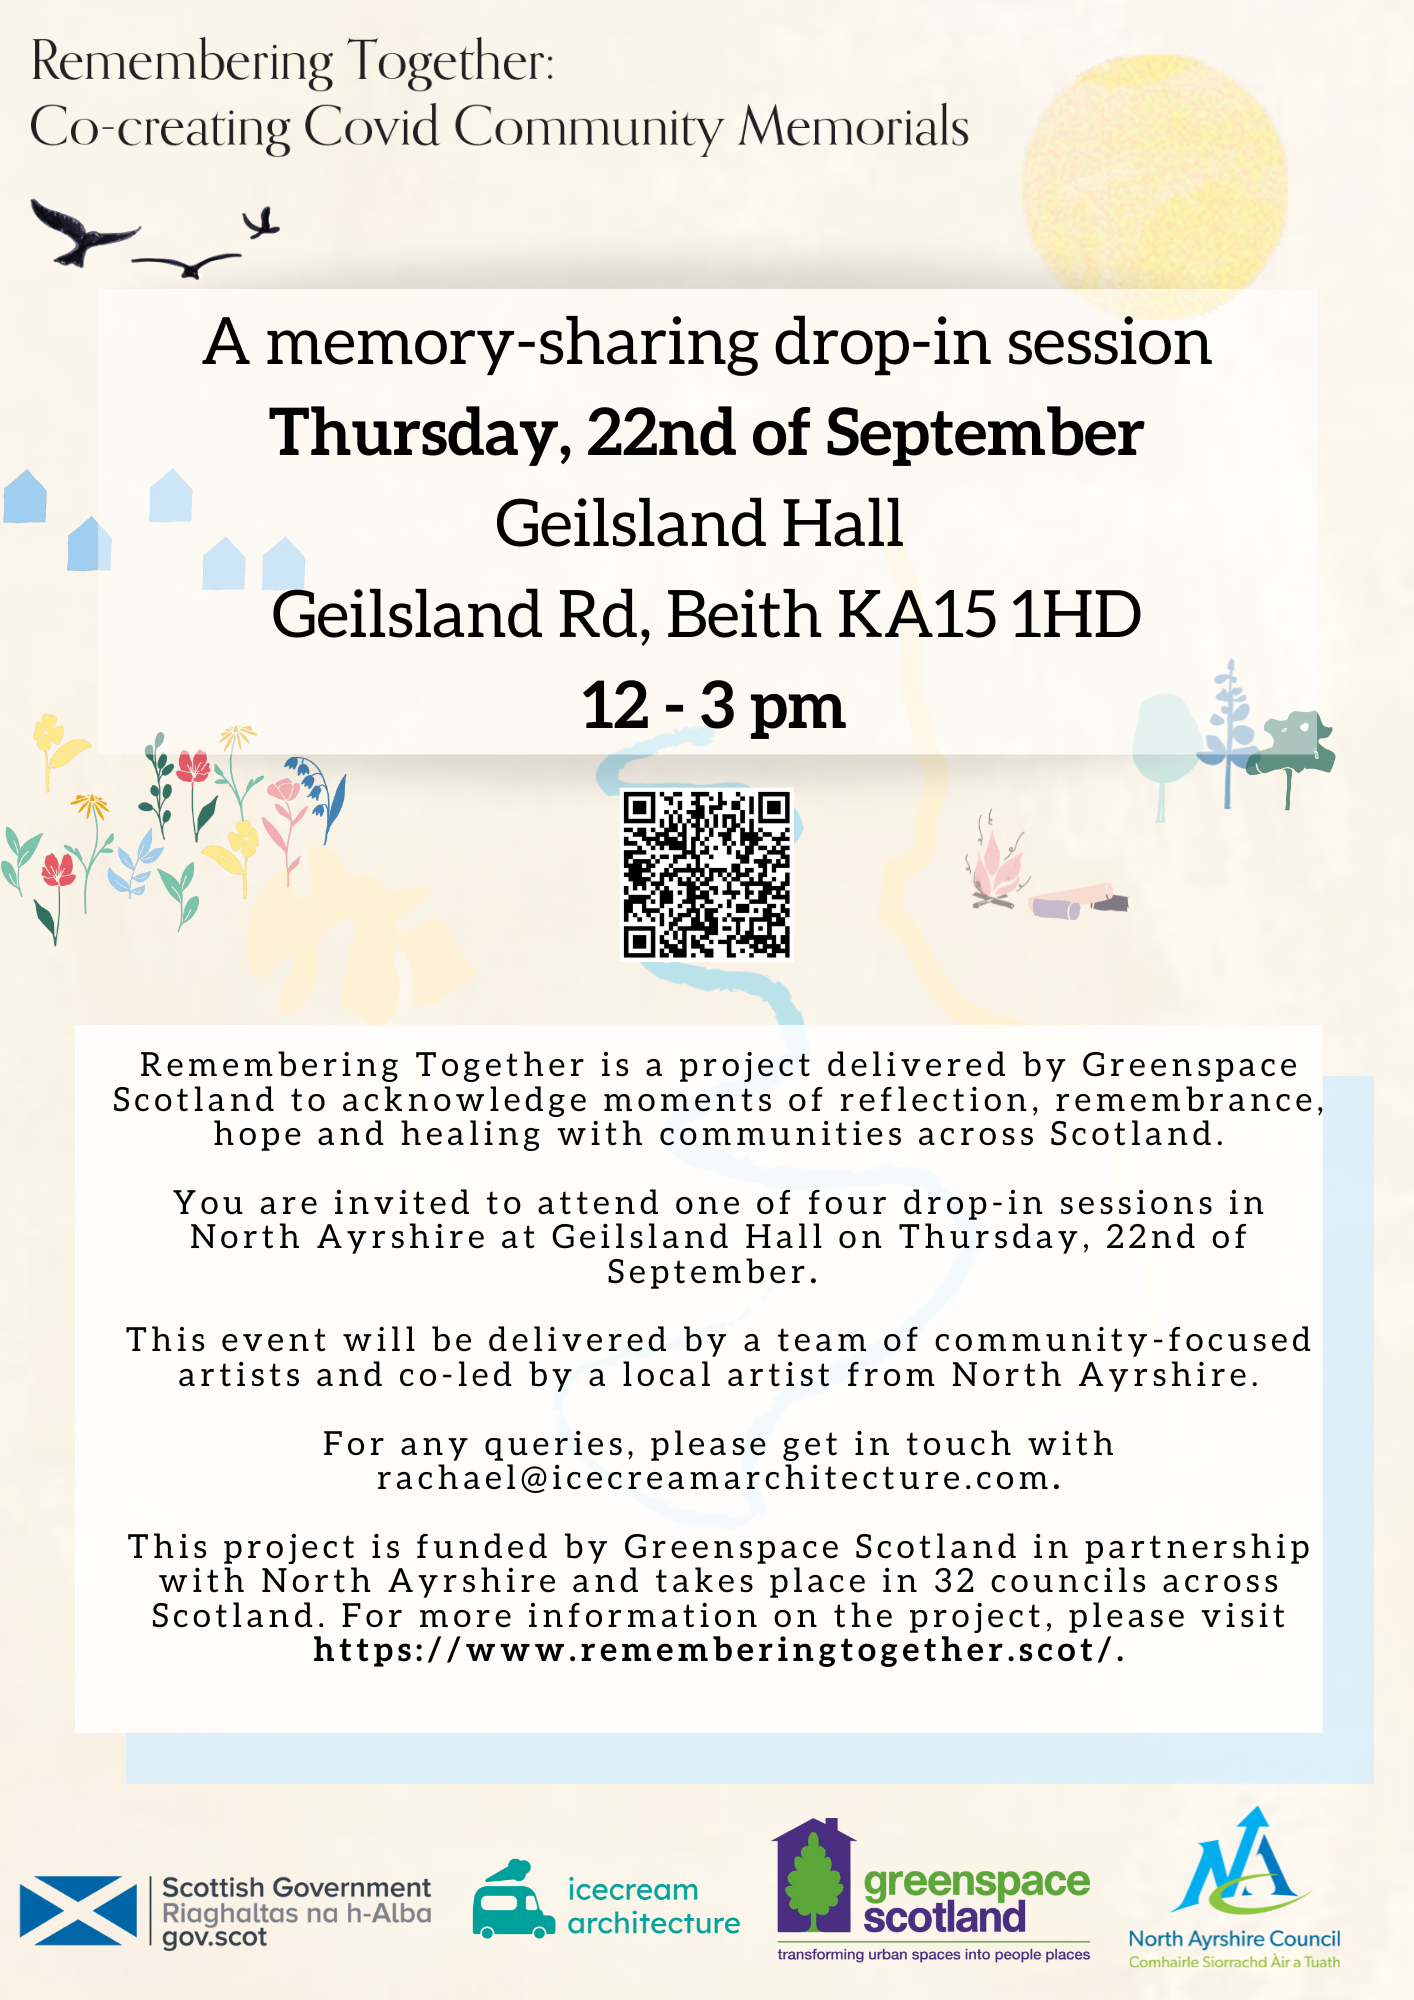 Drop-in session next Thursday 12 - 3 pm at Geilsland Hall for 'Remembering Together' Project!